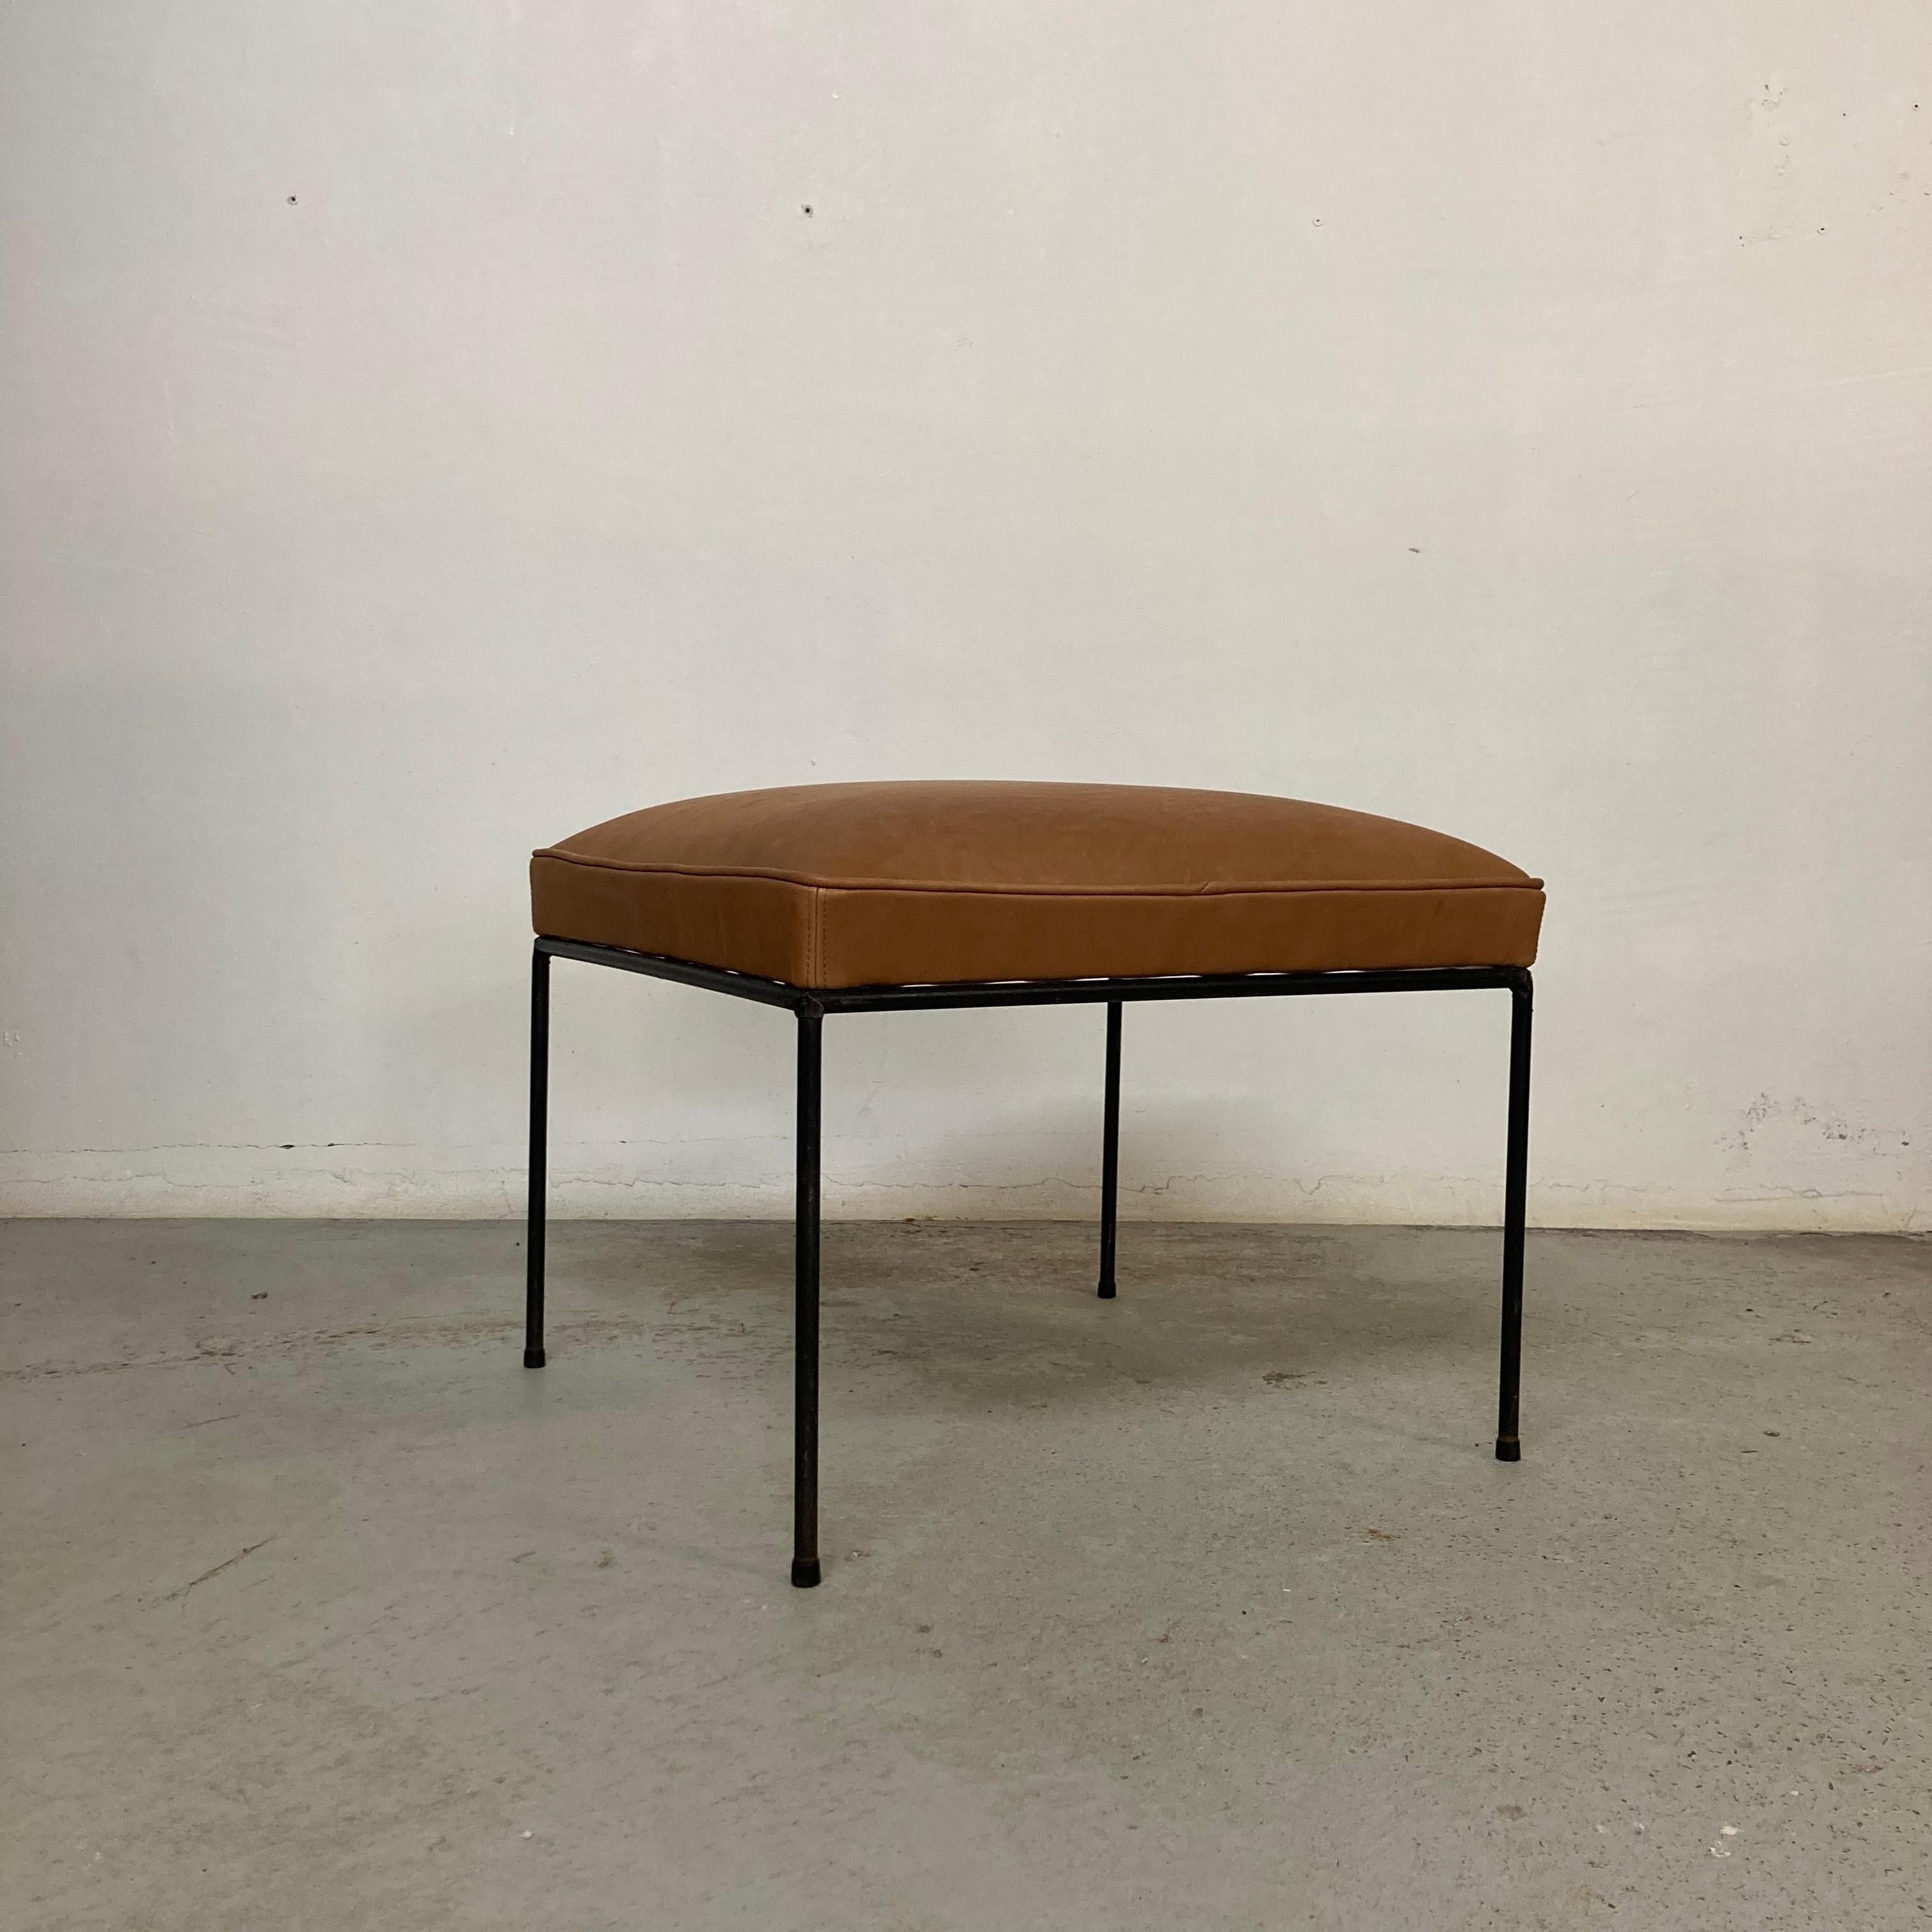 Mid-Century Modern iron stool by Paul McCobb.

Newly reupholstered as they originally were, with no-sag springs, foam and a thick brown leather.

Original condition for the iron feet with light surface rust on some parts.